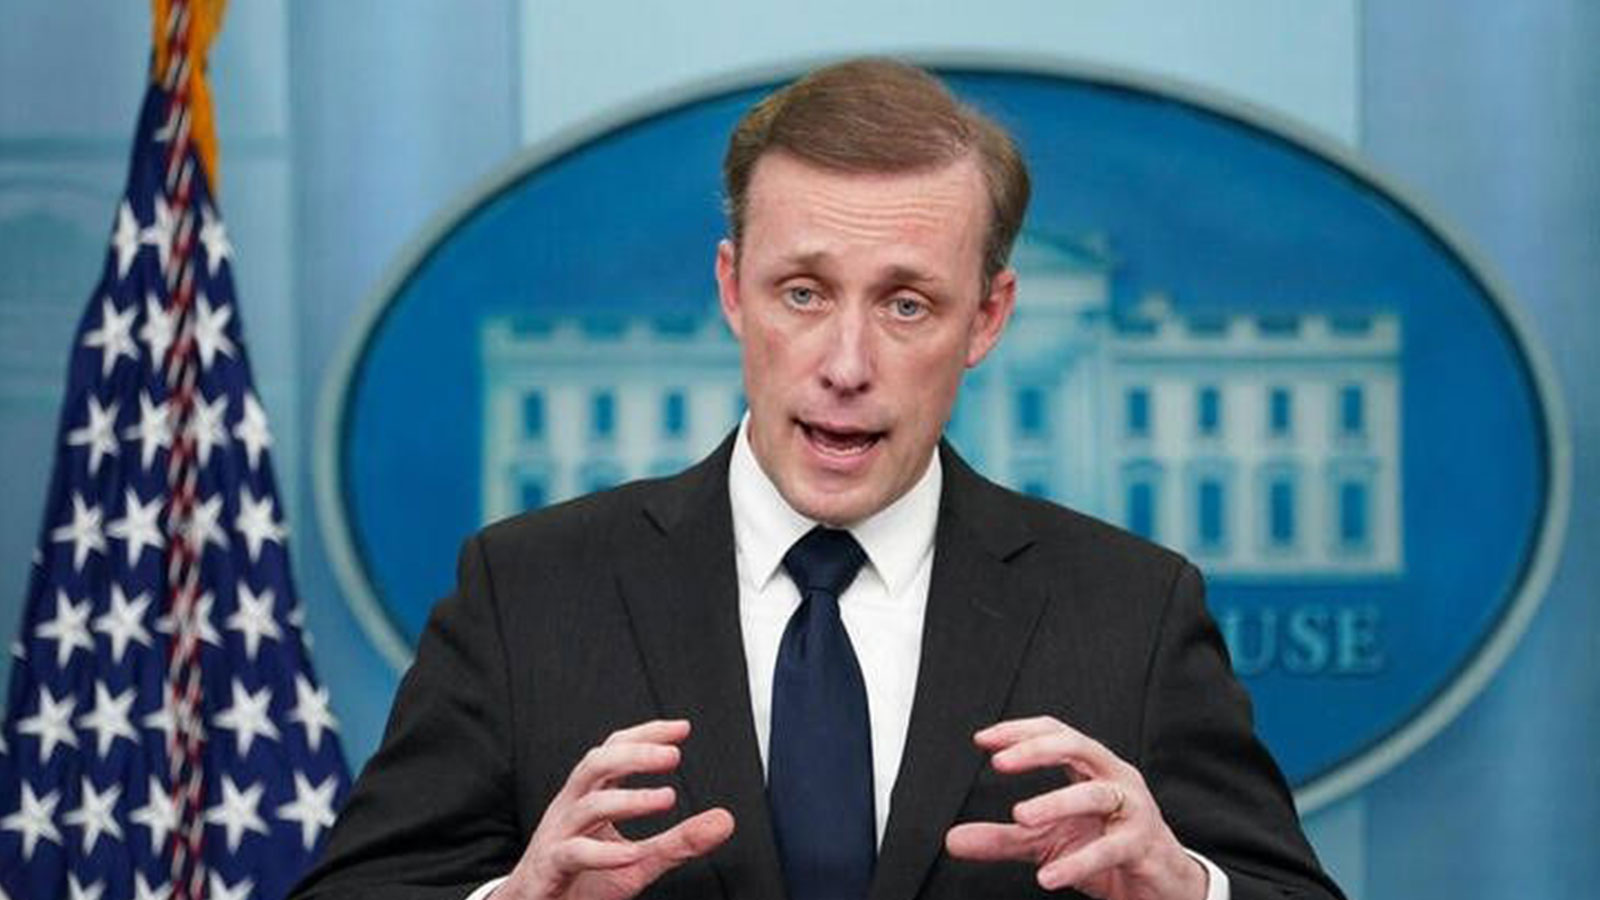 U.S. White House national security adviser Jake Sullivan speaks at a press briefing at the White House in Washington, U.S., December 12, 2022.